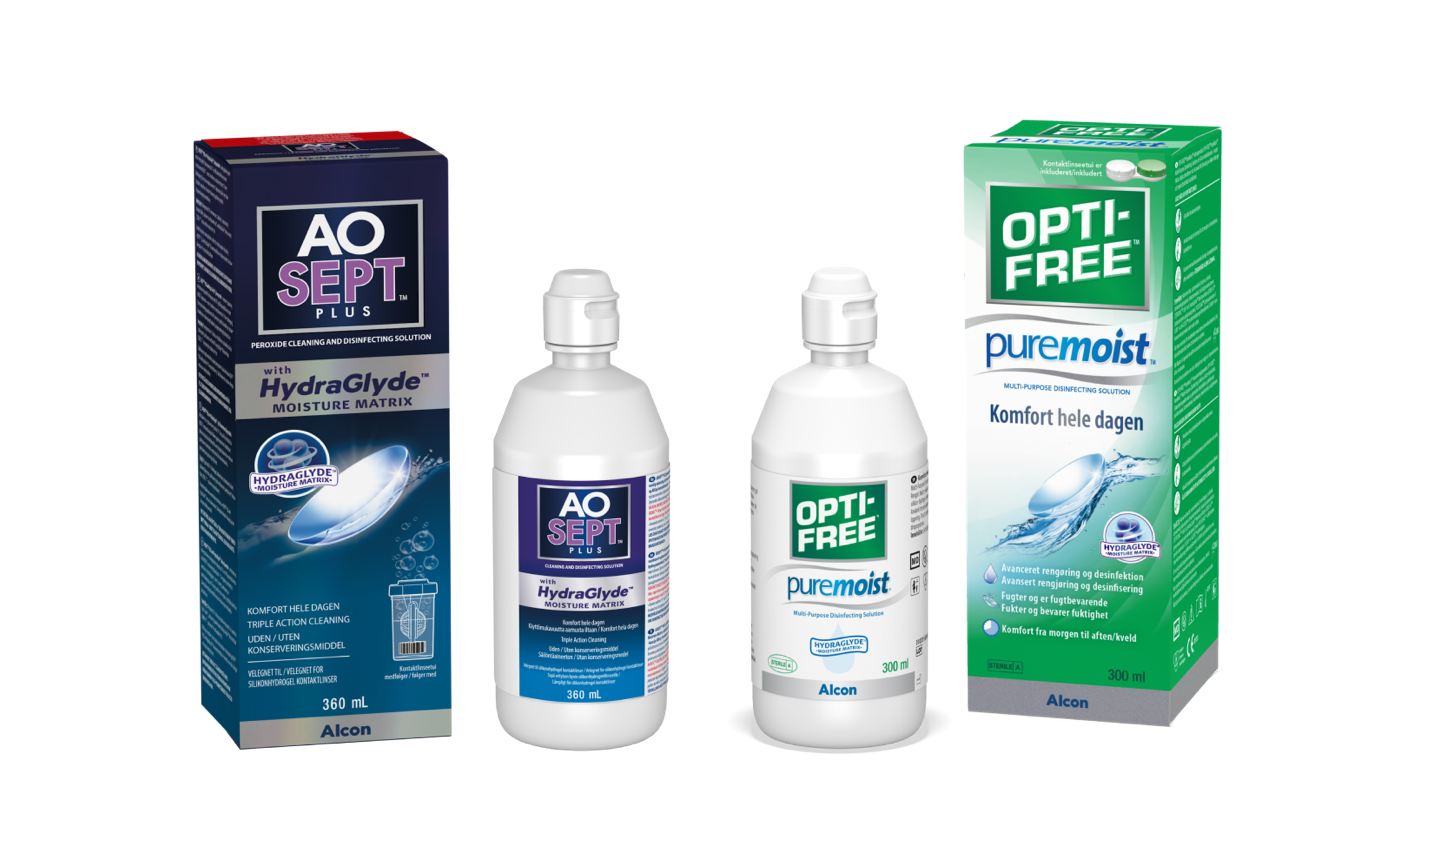 AO SEPT plus HydraGlyde and OPTI-FREE puremoist